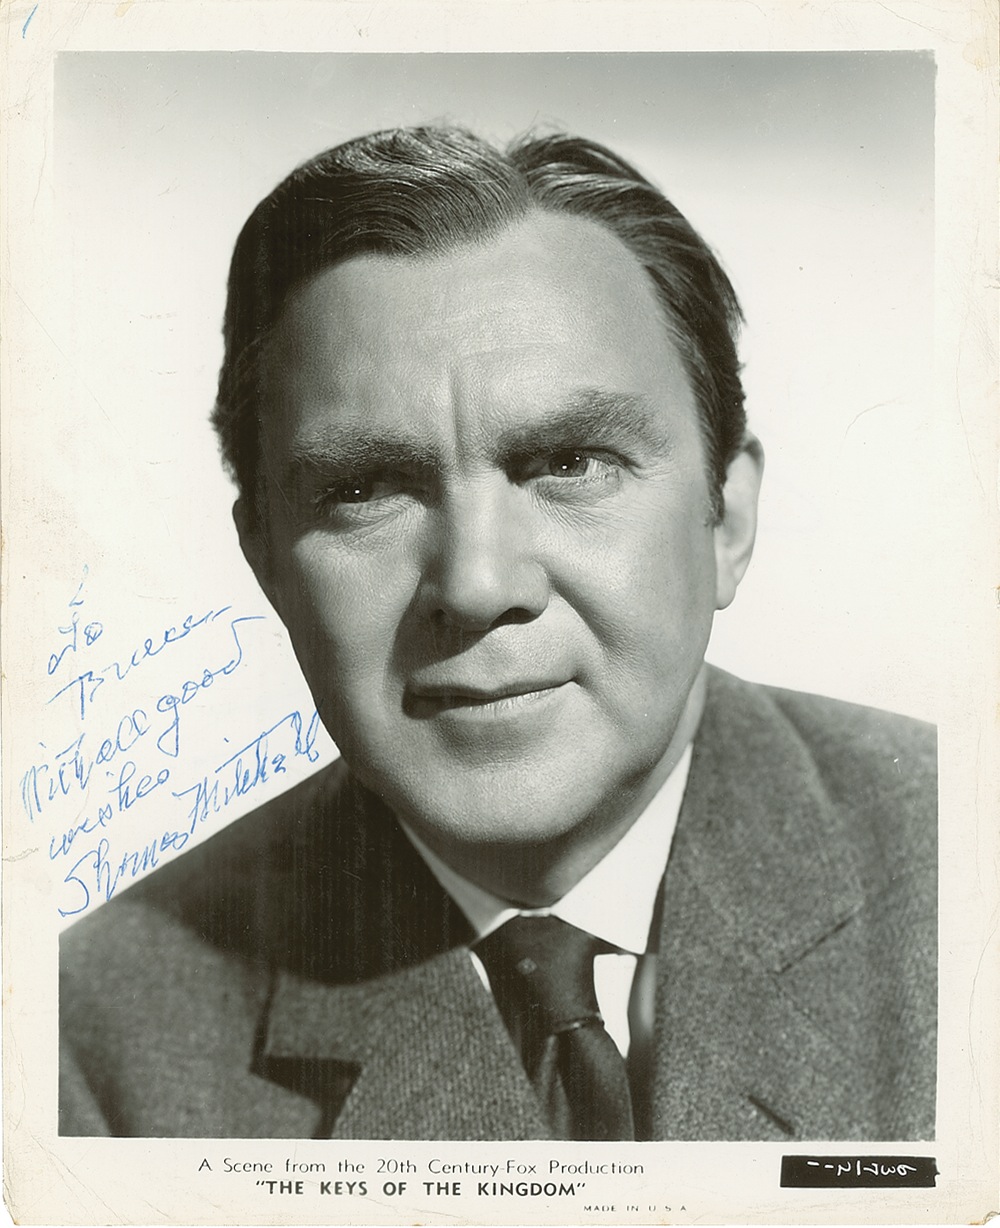 Thomas Mitchell - Autographed Inscribed Photograph